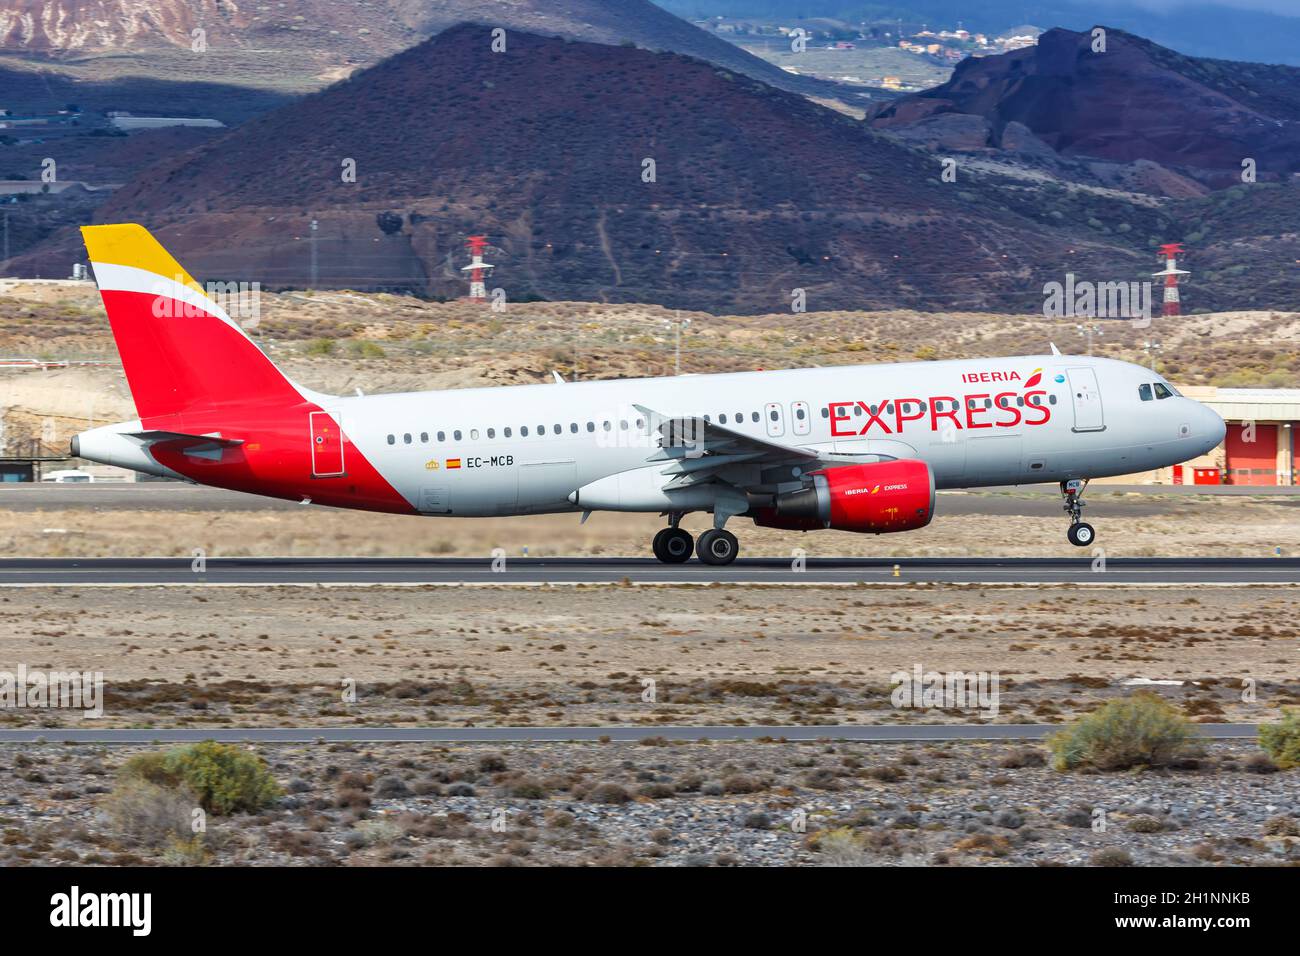 Tenerife, Spain - November 23, 2019: Iberia Express Airbus A320 airplane at Tenerife South Airport in Spain. Airbus is a European aircraft manufacture Stock Photo